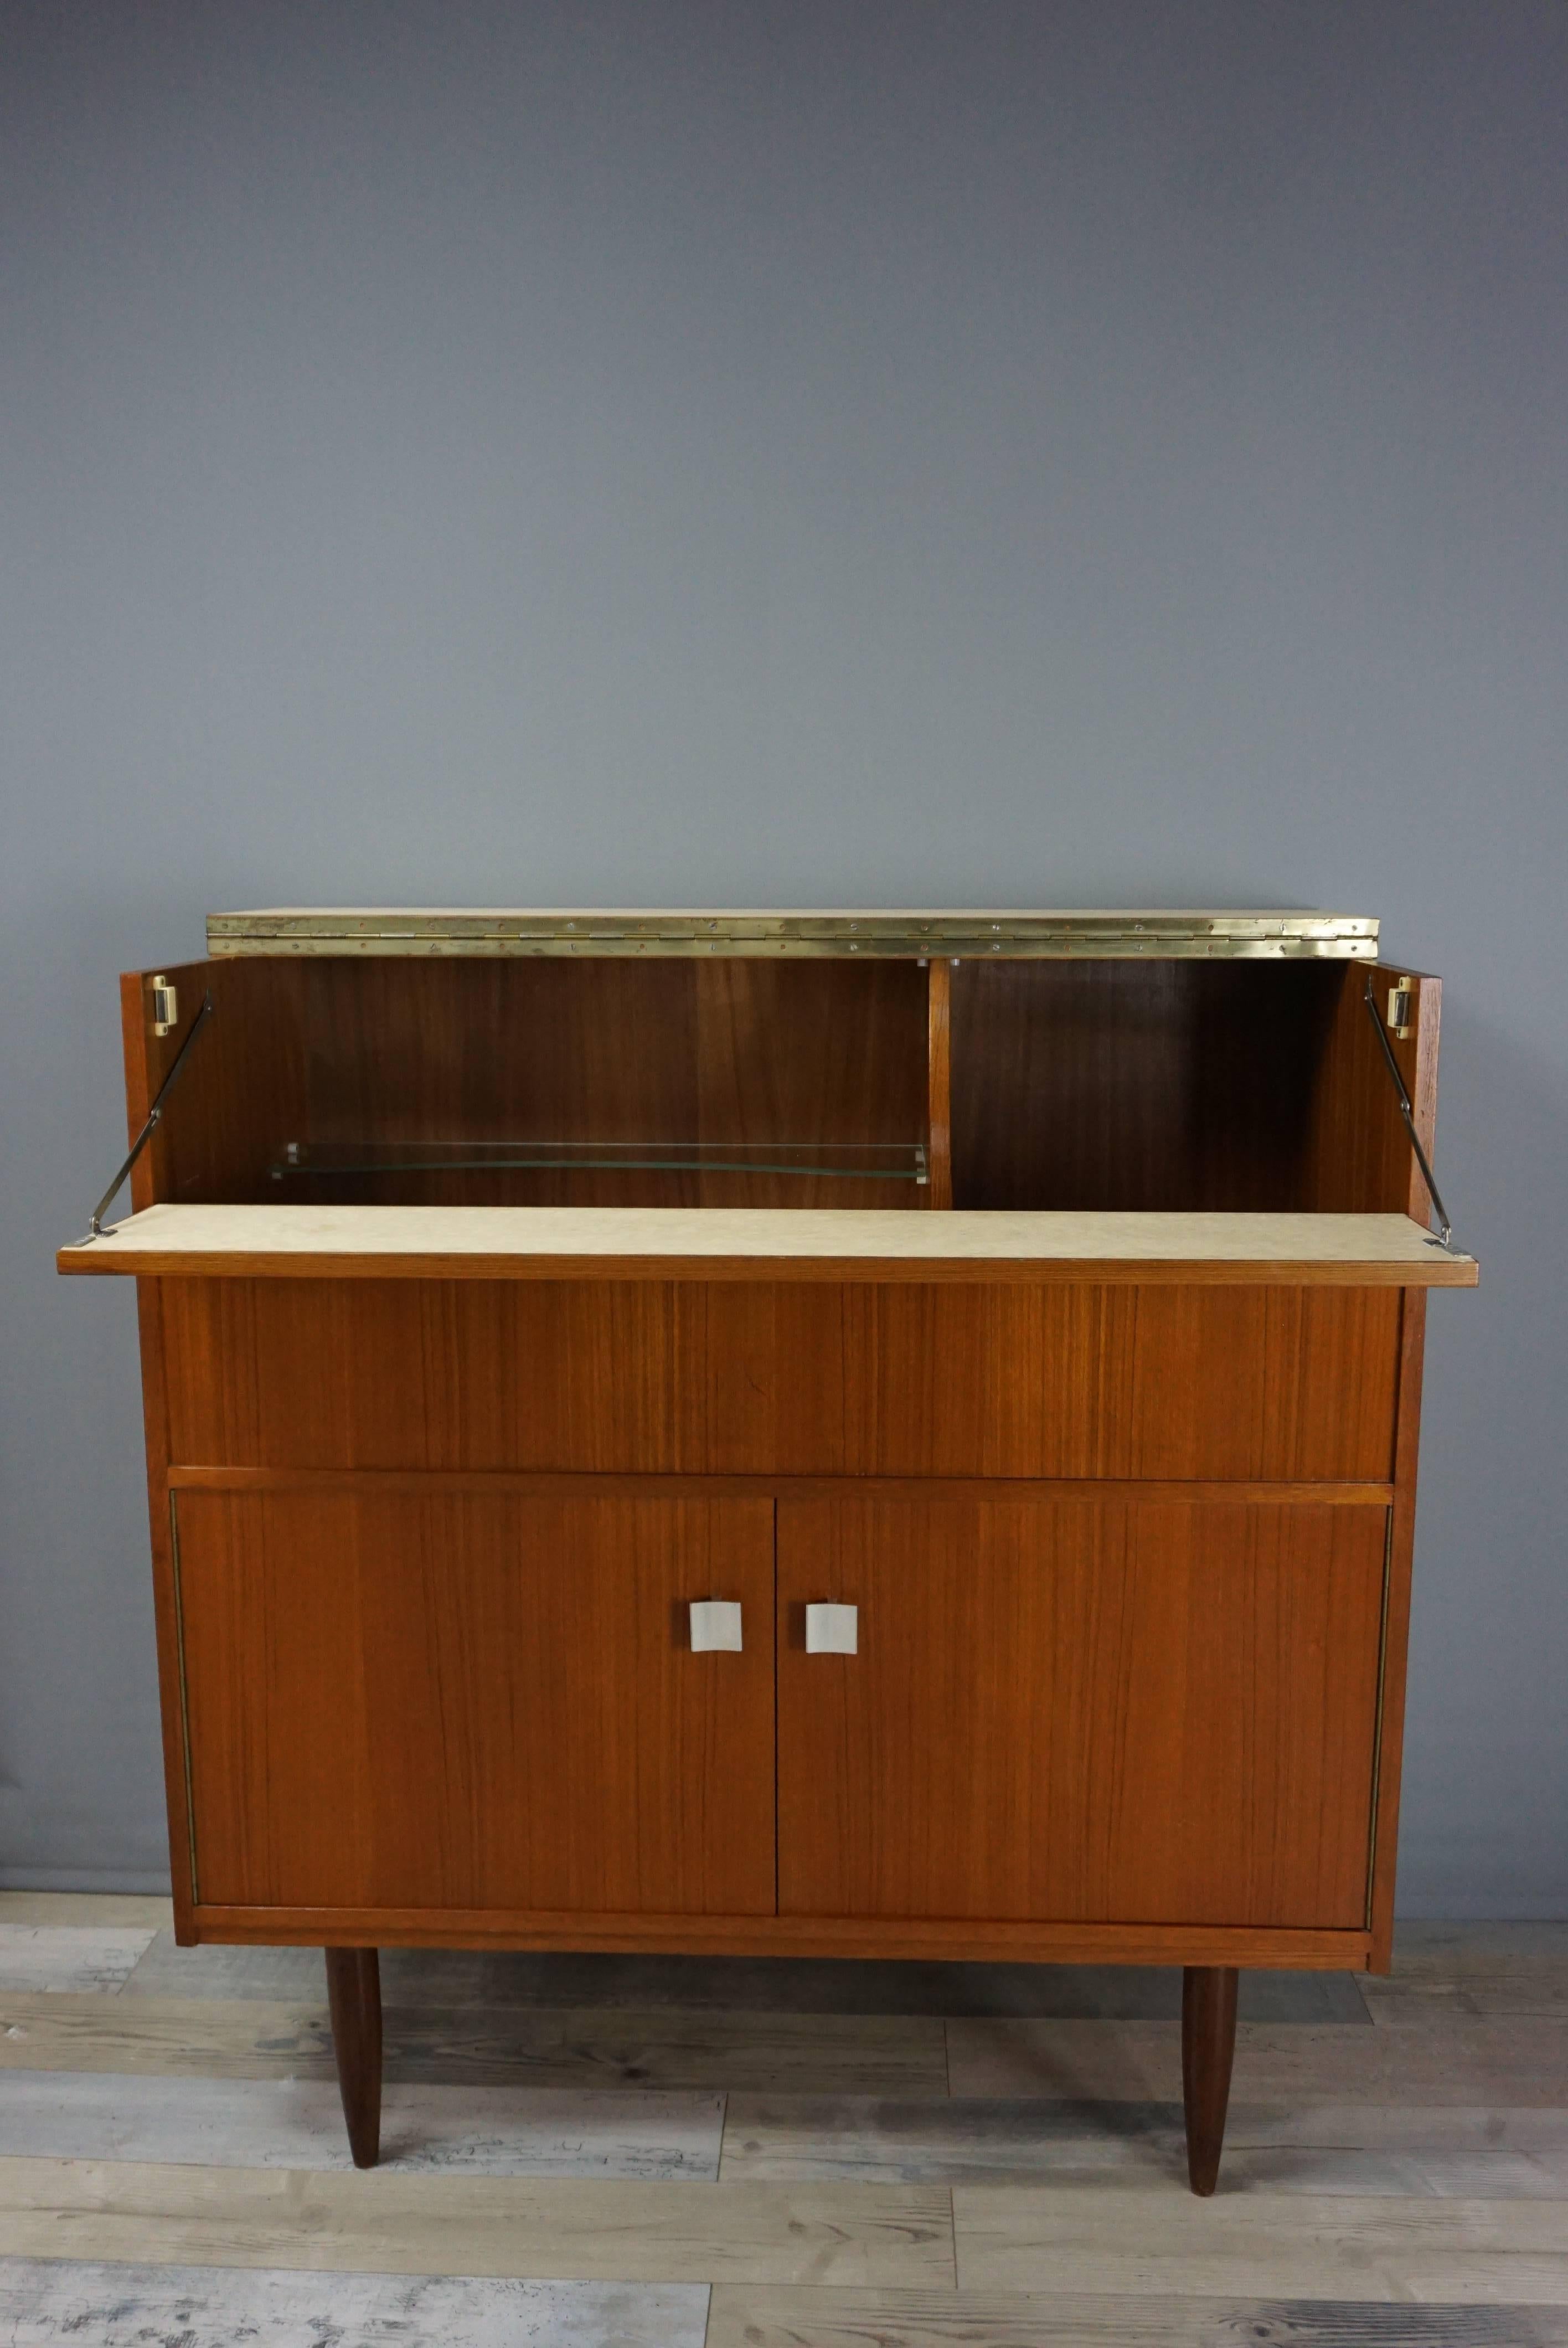 20th Century Ceraùic and Wooden Teak Bar Cabinet from the 1960s